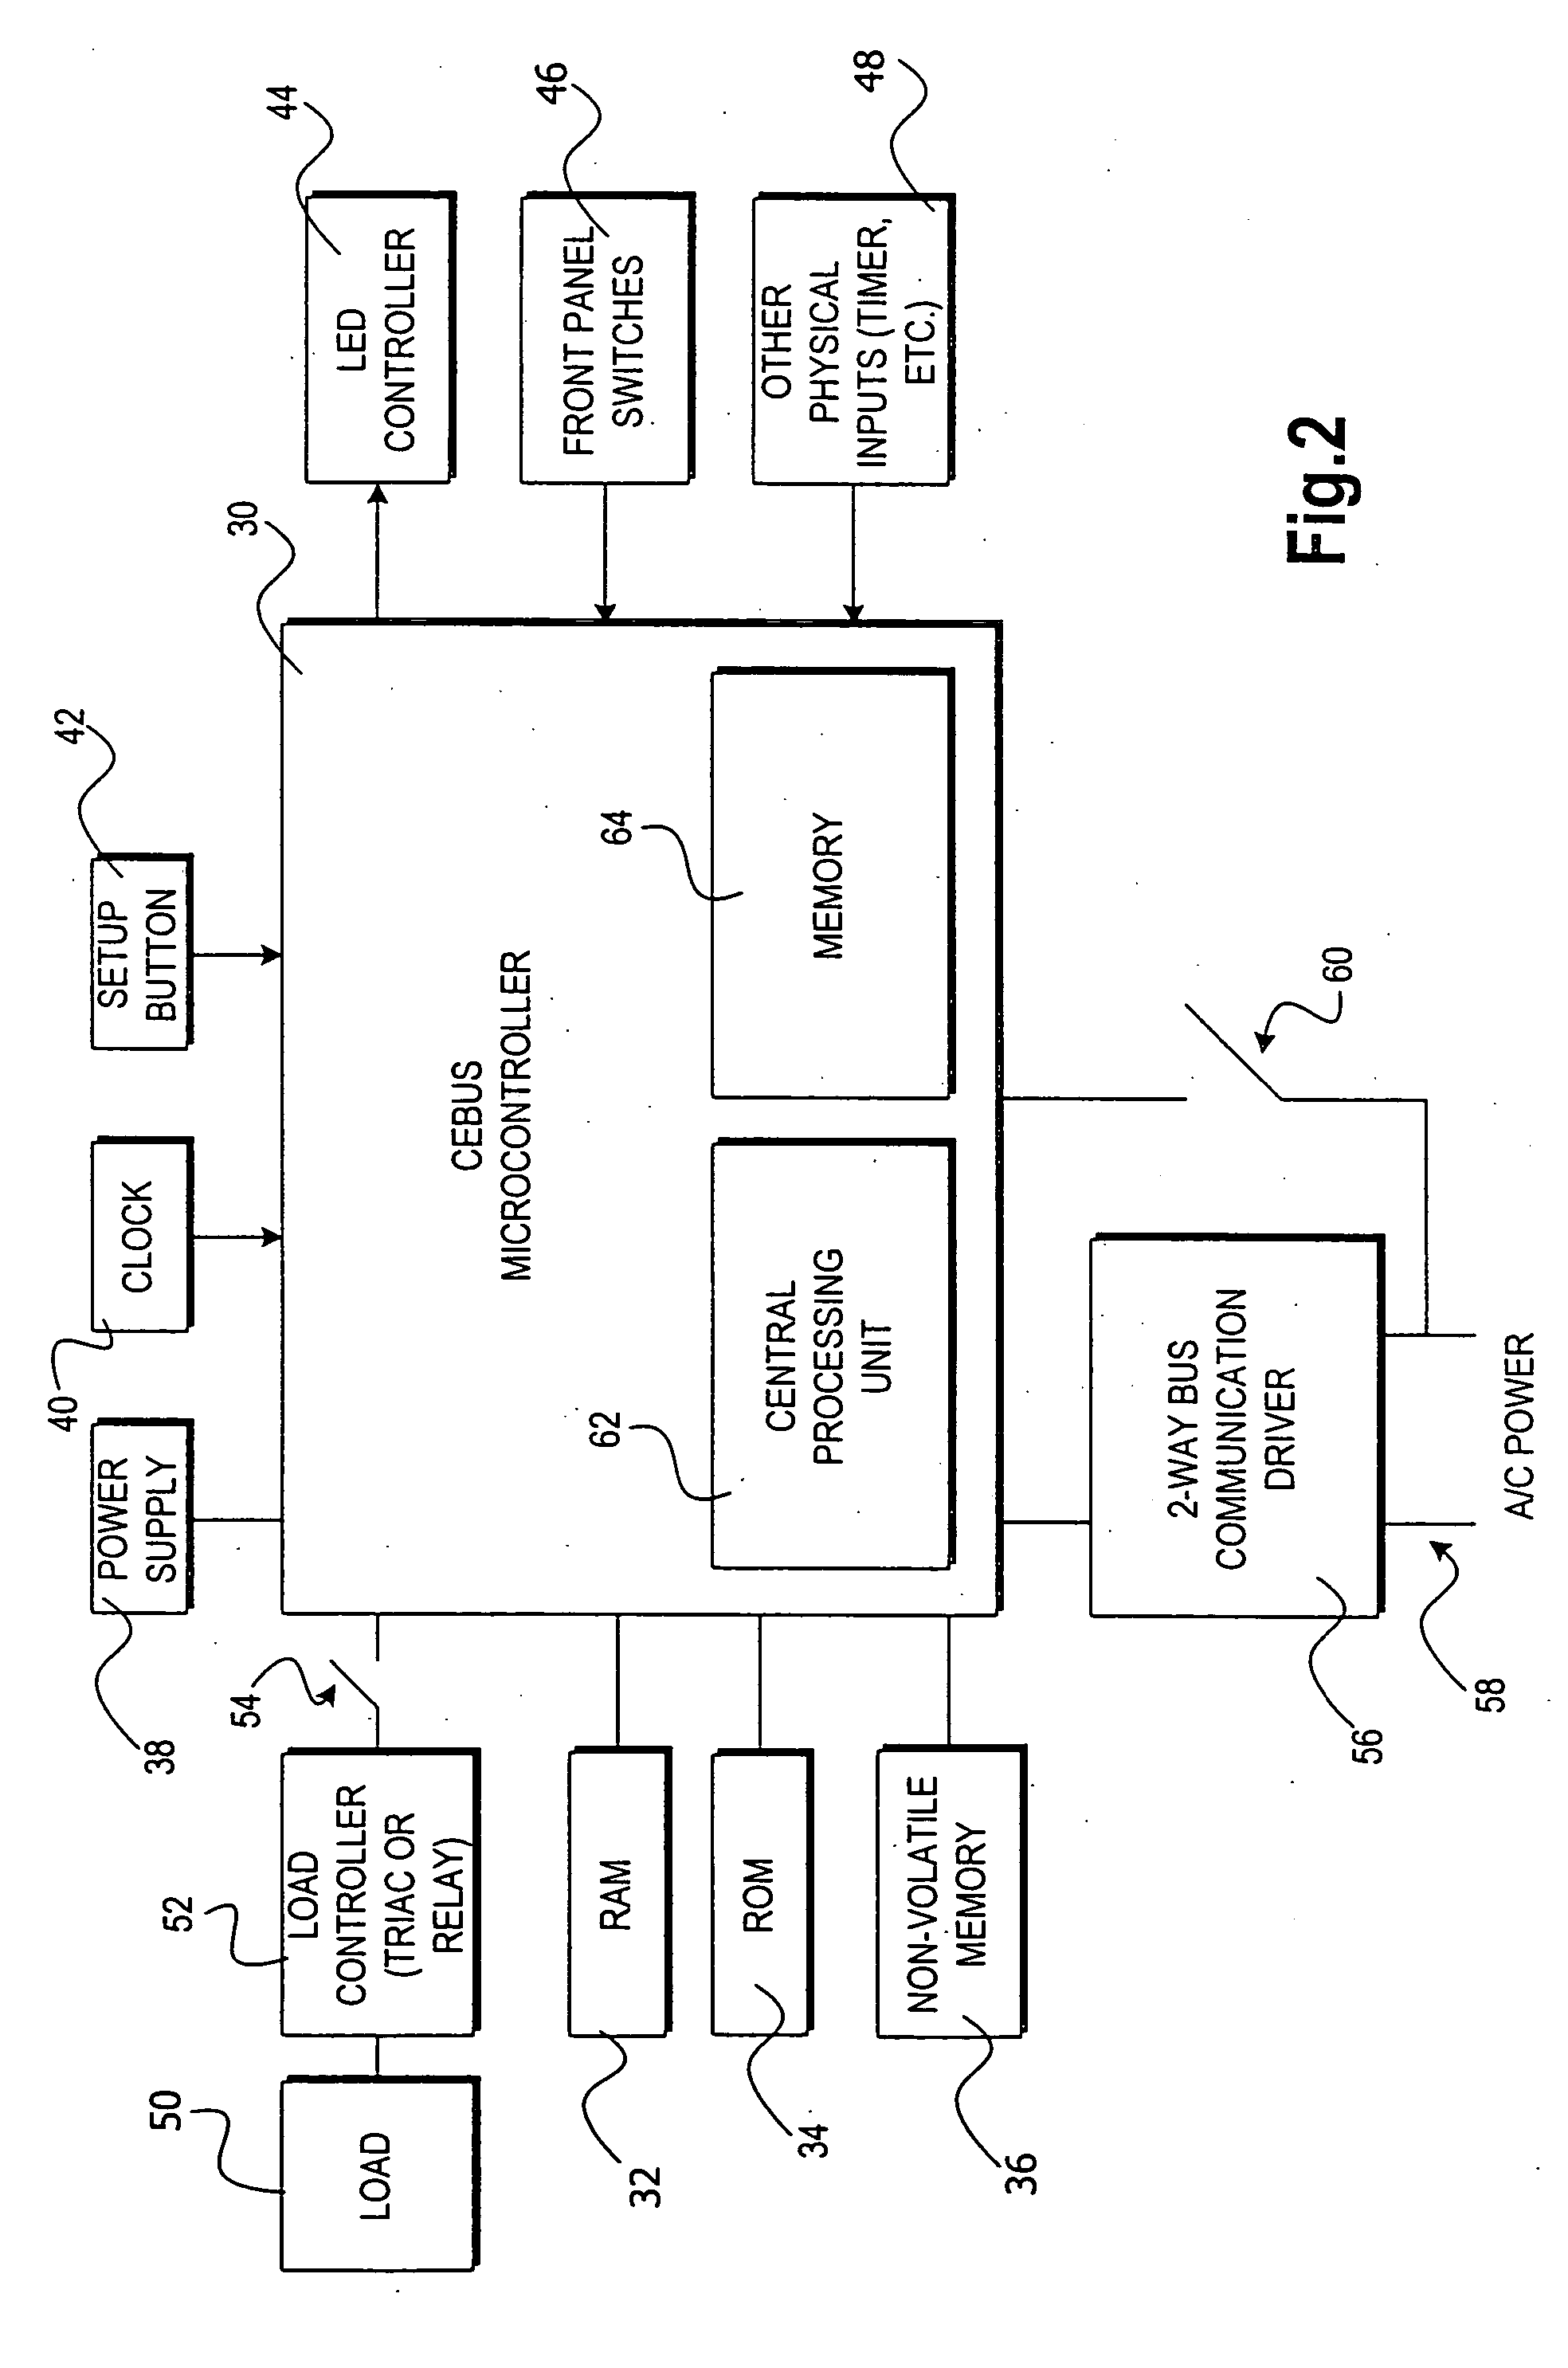 Method and apparatus for providing distributed control of a home automation and control system